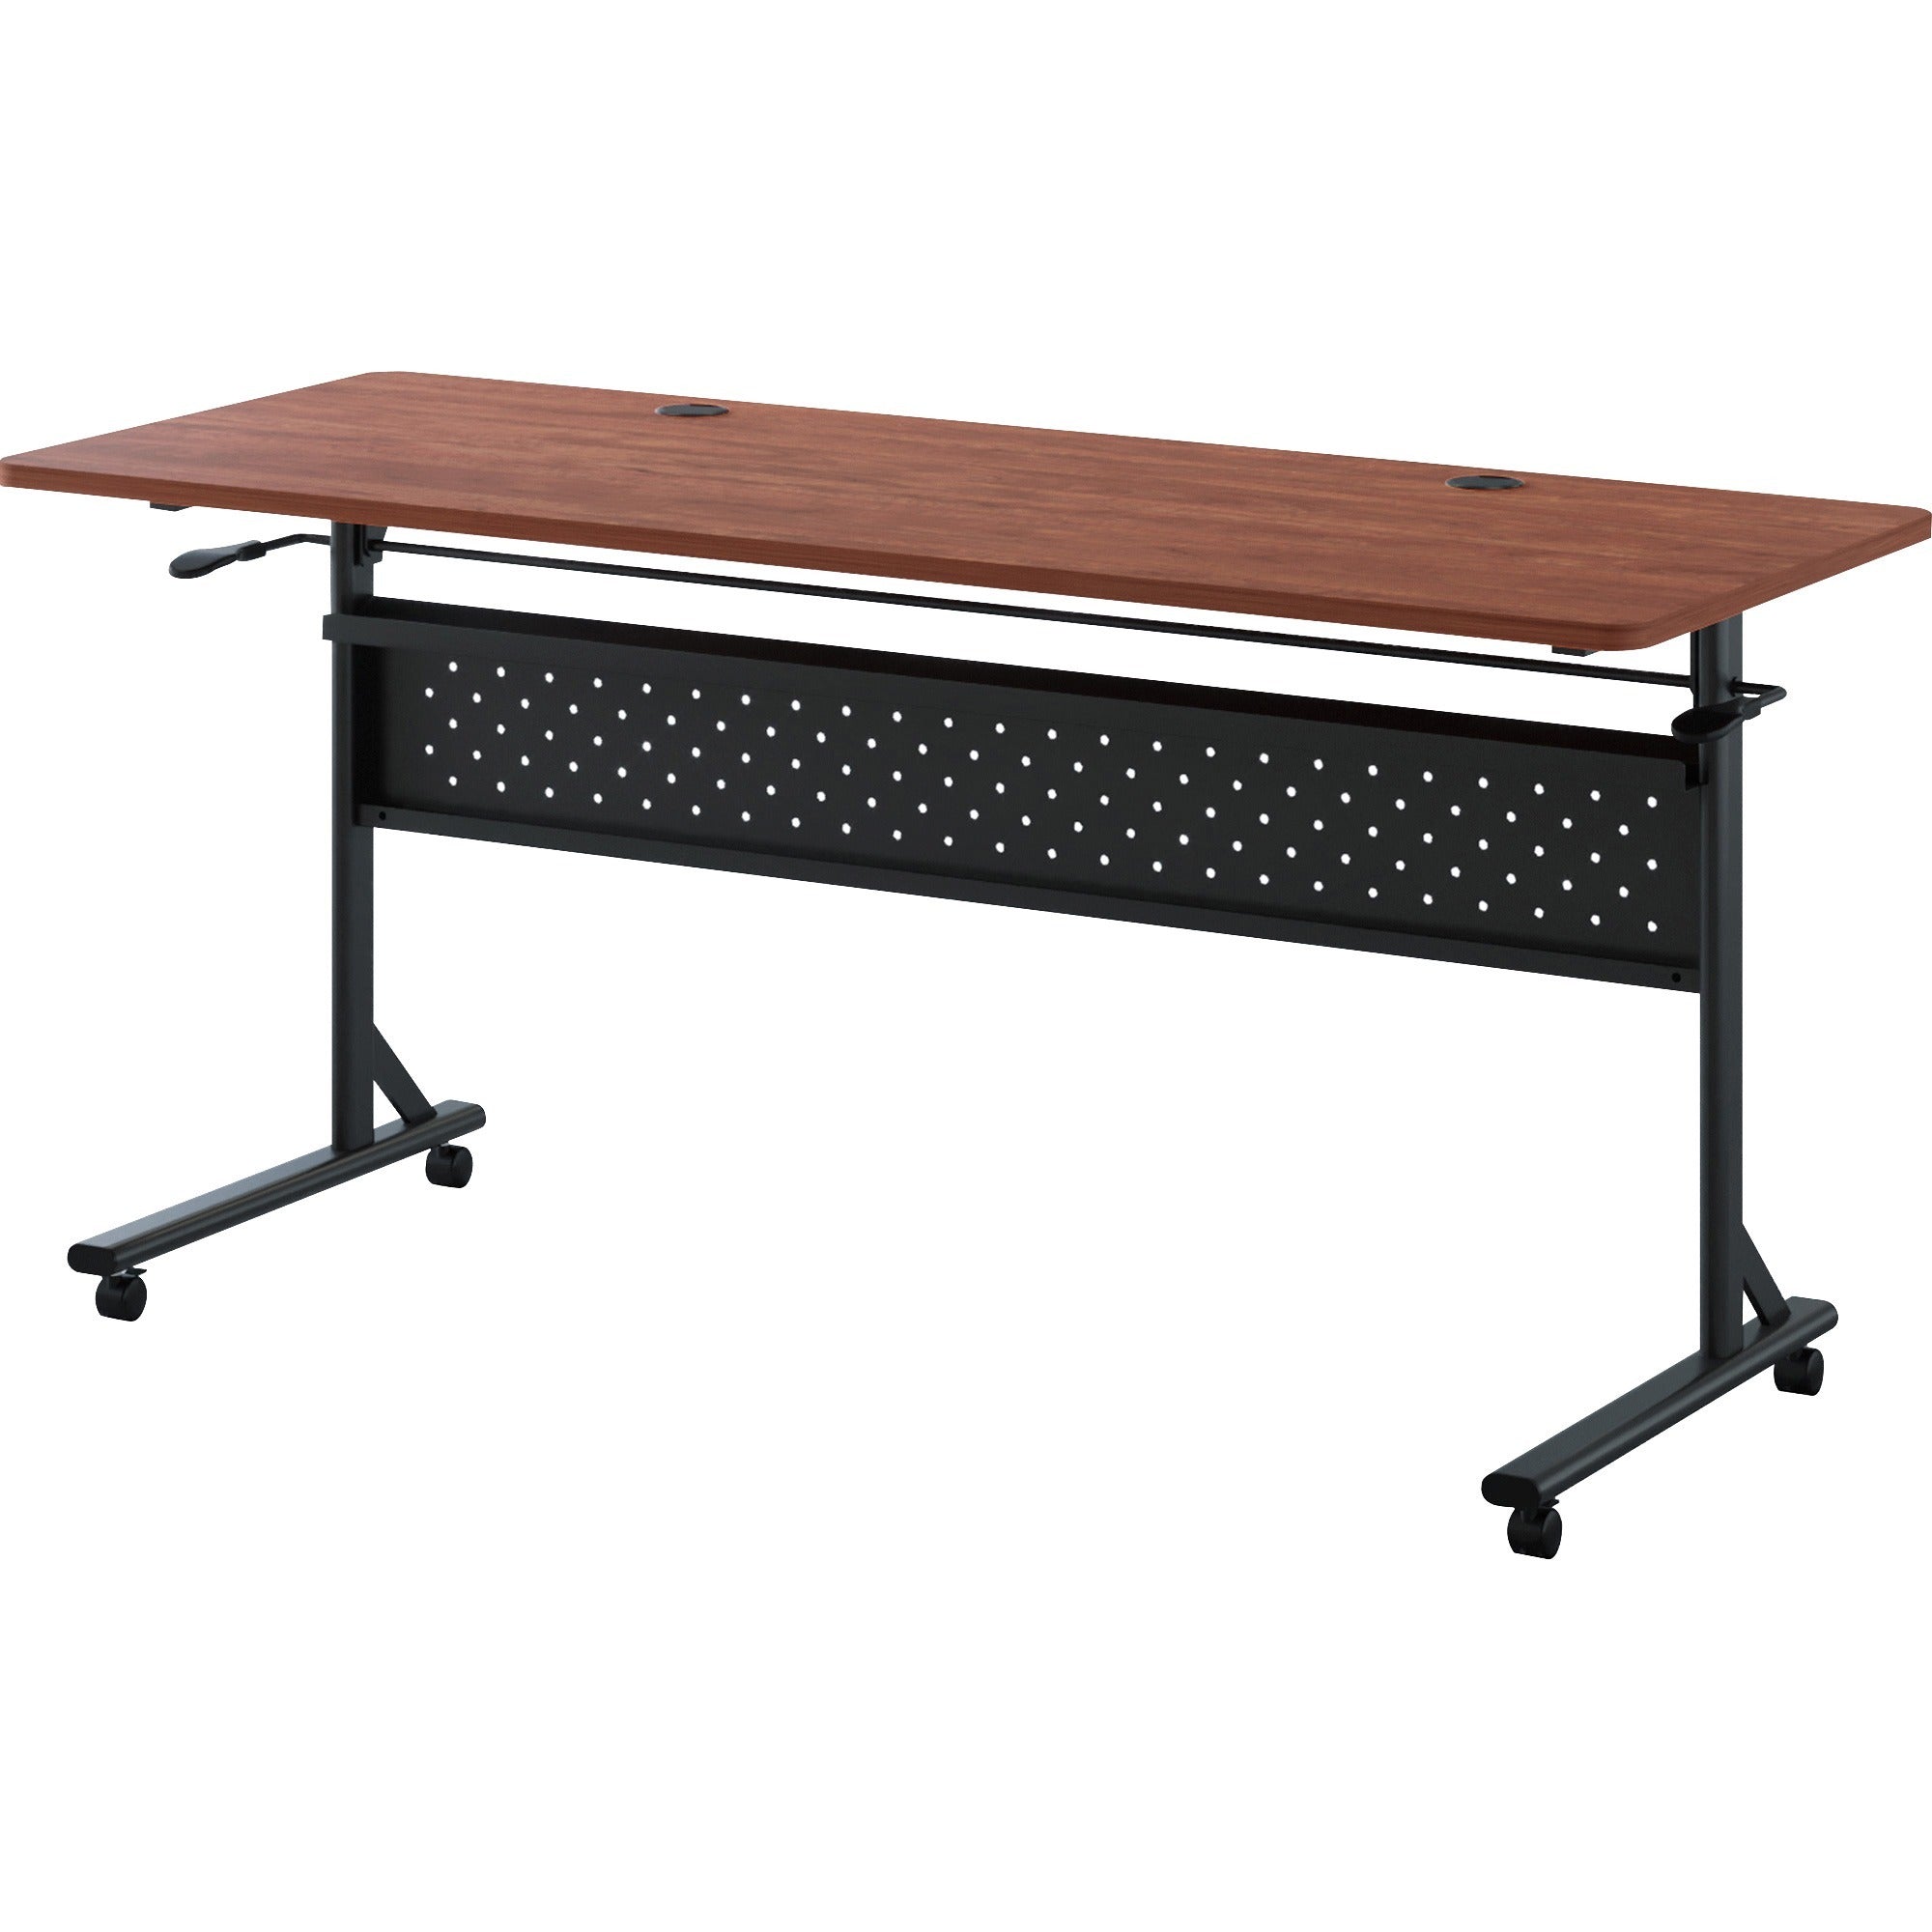 lorell-shift-20-flip-and-nesting-mobile-table-for-table-toplaminated-rectangle-top-60-table-top-length-x-24-table-top-width-x-1-table-top-thickness-2950-height-assembly-required-cherry-1-each_llr60762 - 4